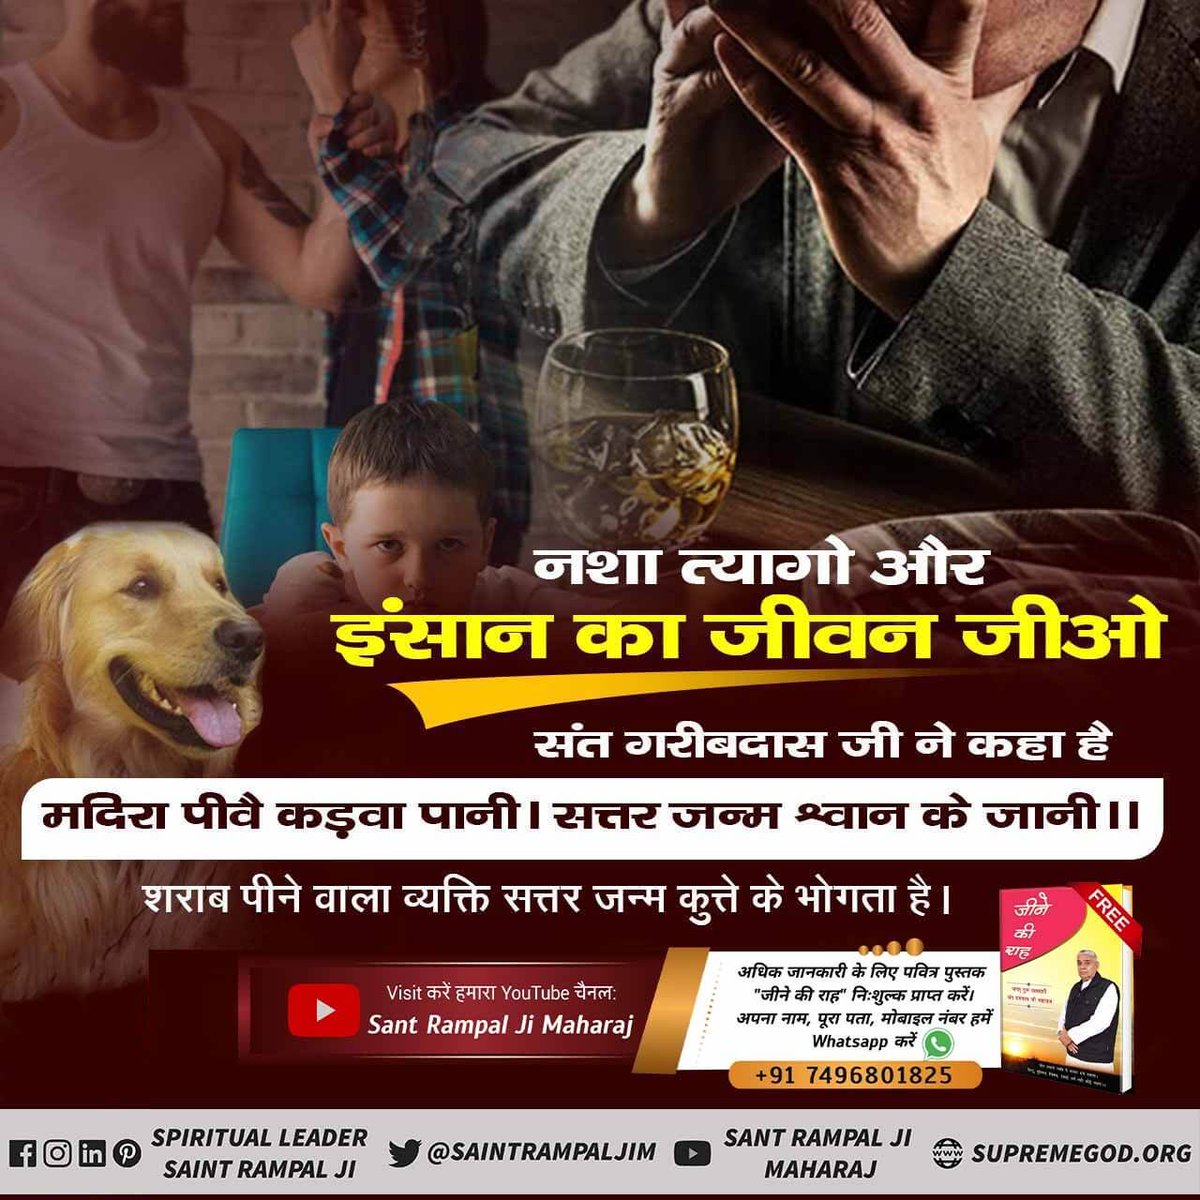 'Intoxicants' should not even be kept in the village or city, let alone at home. one should not even think of consuming them Sant Rampal Ji Maharaj 

#नशा_एकअभिशापहै_कैसे_मुक्तिहो ⤵️